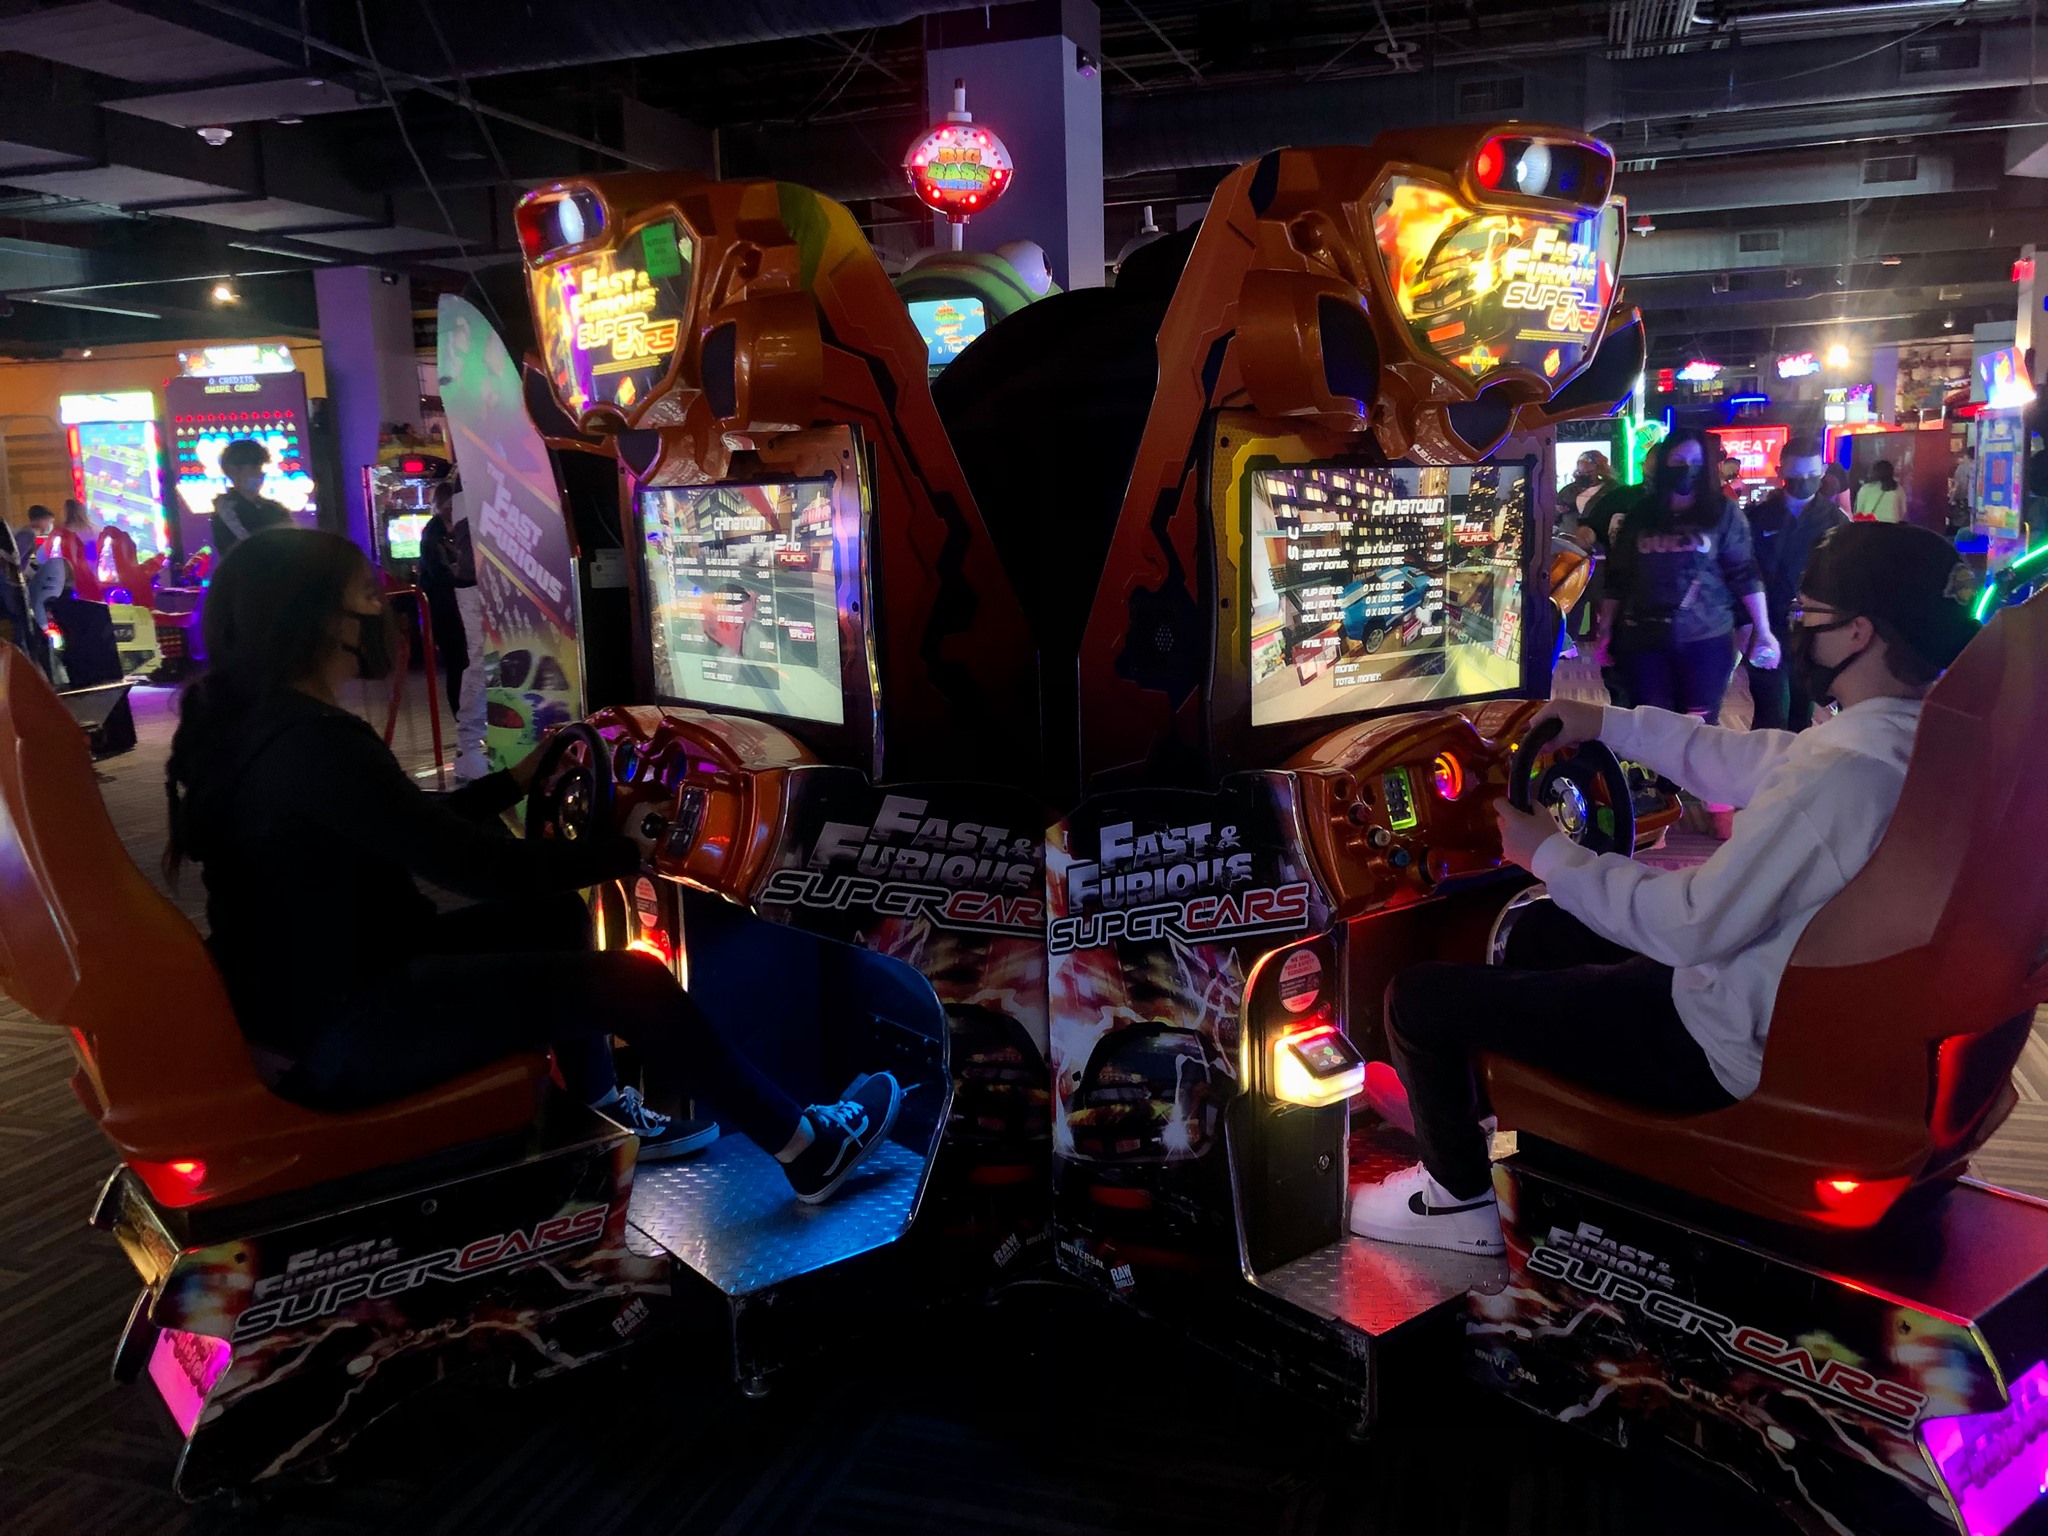 Gamers of all ages can play arcade games in GameWorks — Seattle